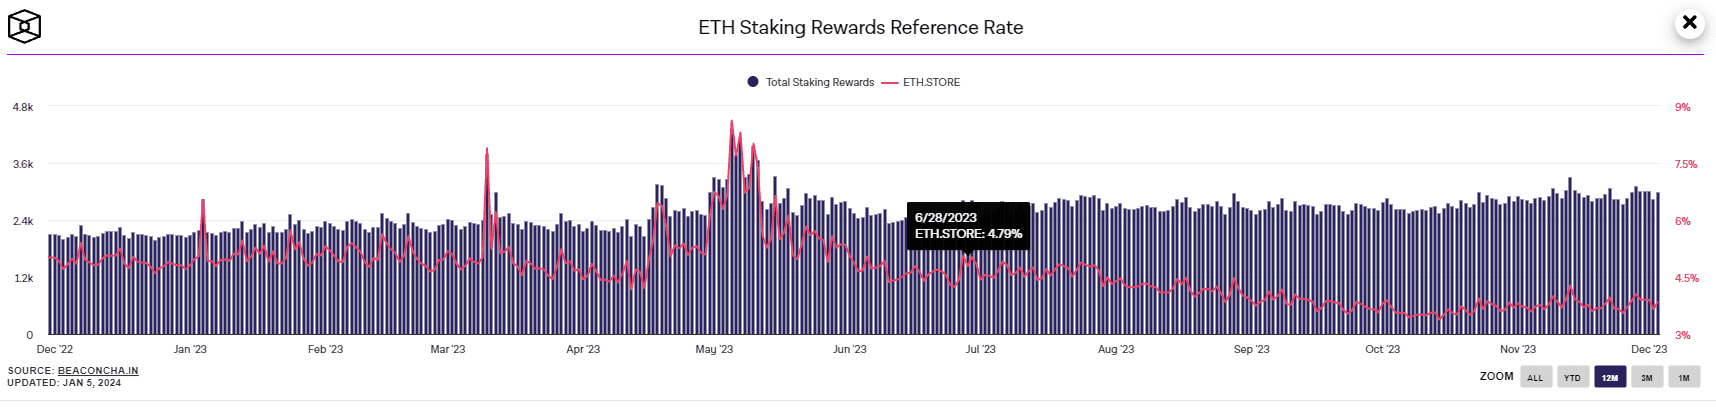 Ethereum Staking Reward Reference Rate 